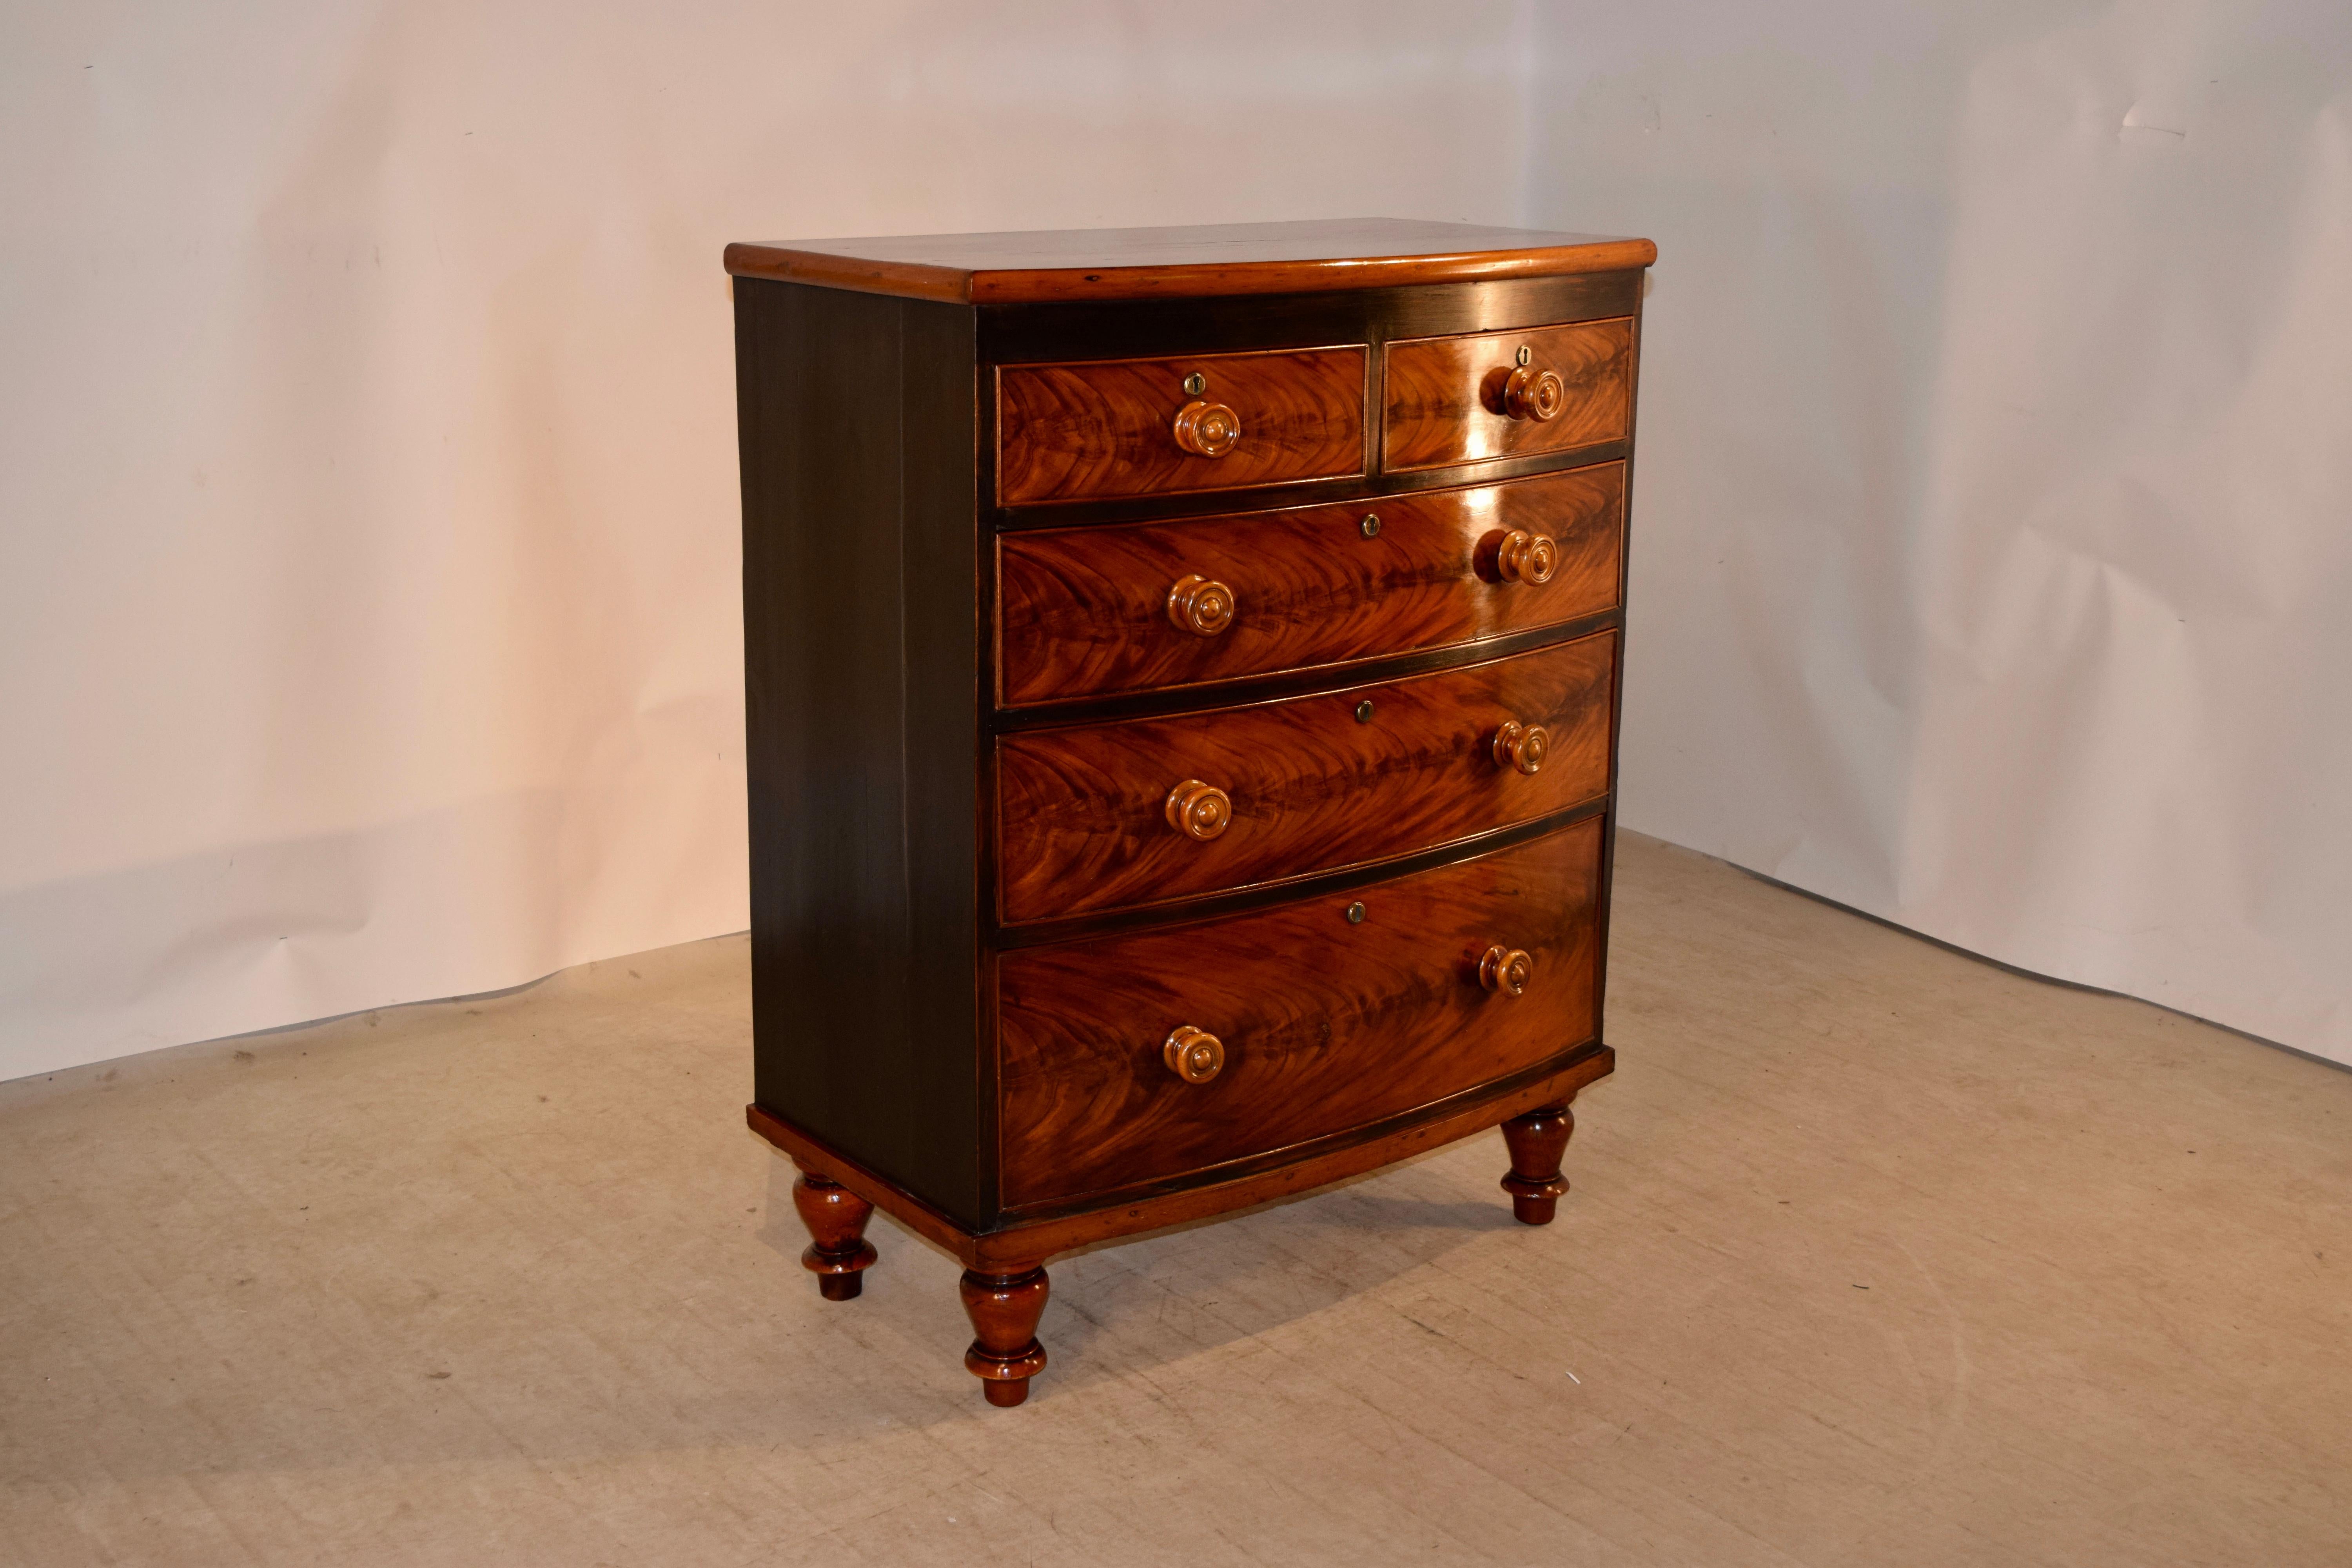 19th century mahogany bow front chest from England. The top has lovely graining and color, and follows down to painted sides and a painted front of the case for contrast with the flame mahogany drawer fronts. The case is raised on hand turned feet.